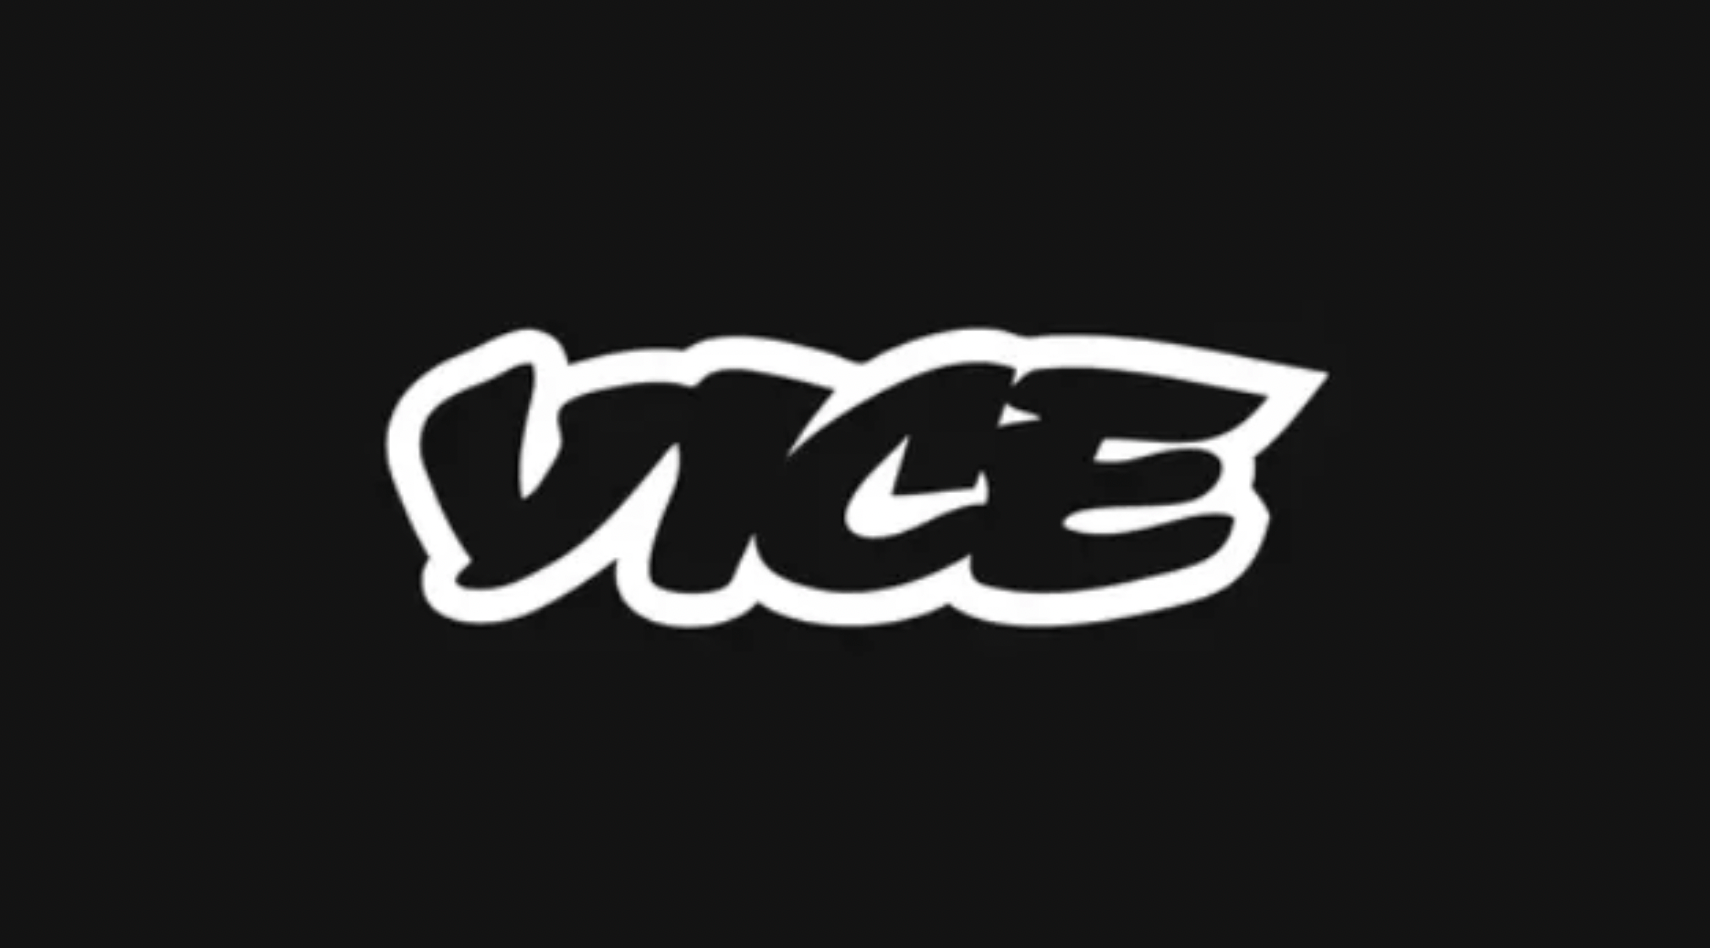 Vice Media files for bankruptcy – NYT